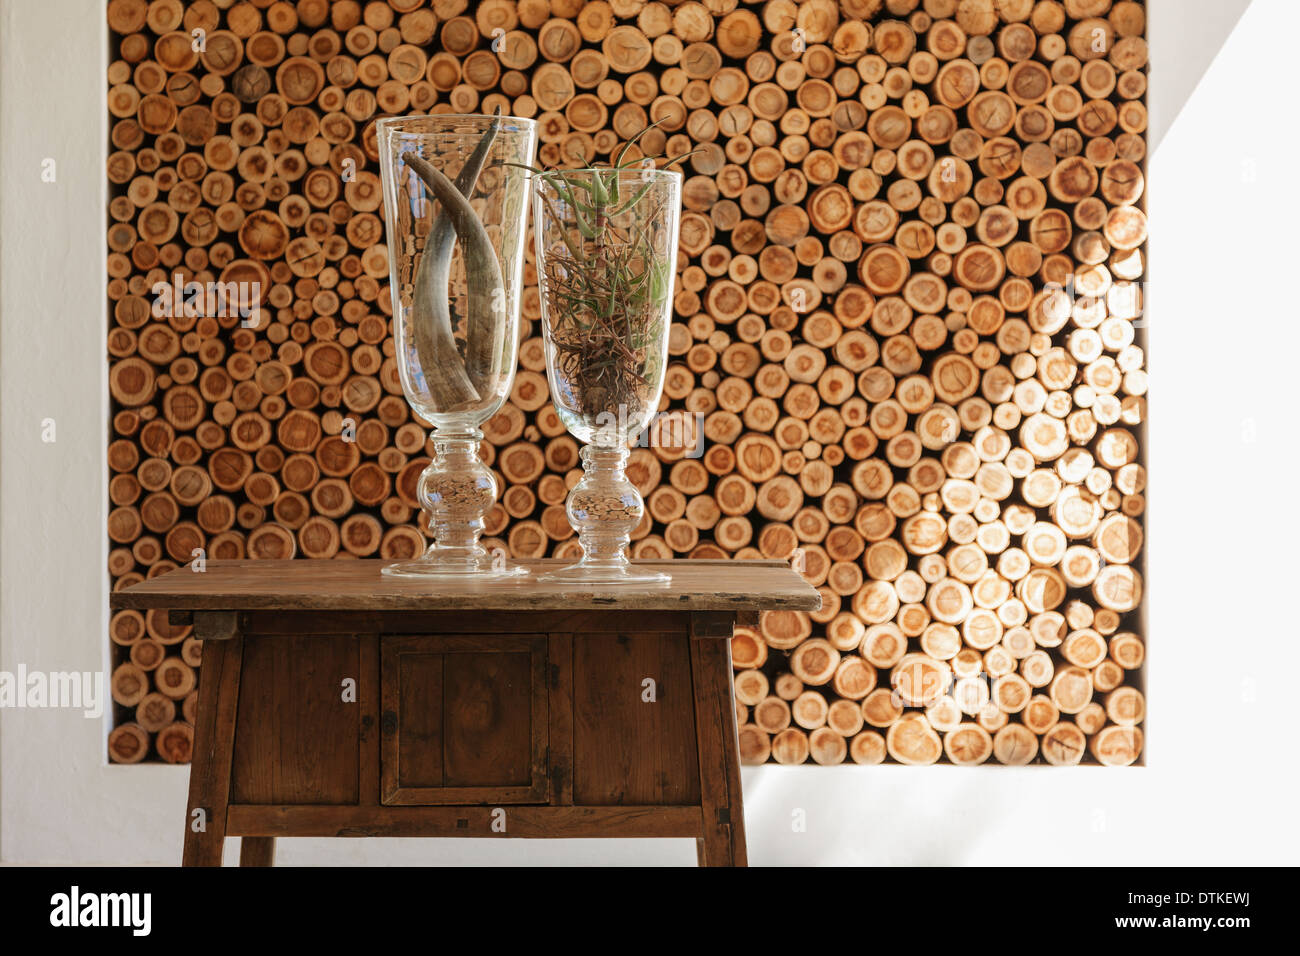 Vases and wooden logs in modern house Stock Photo